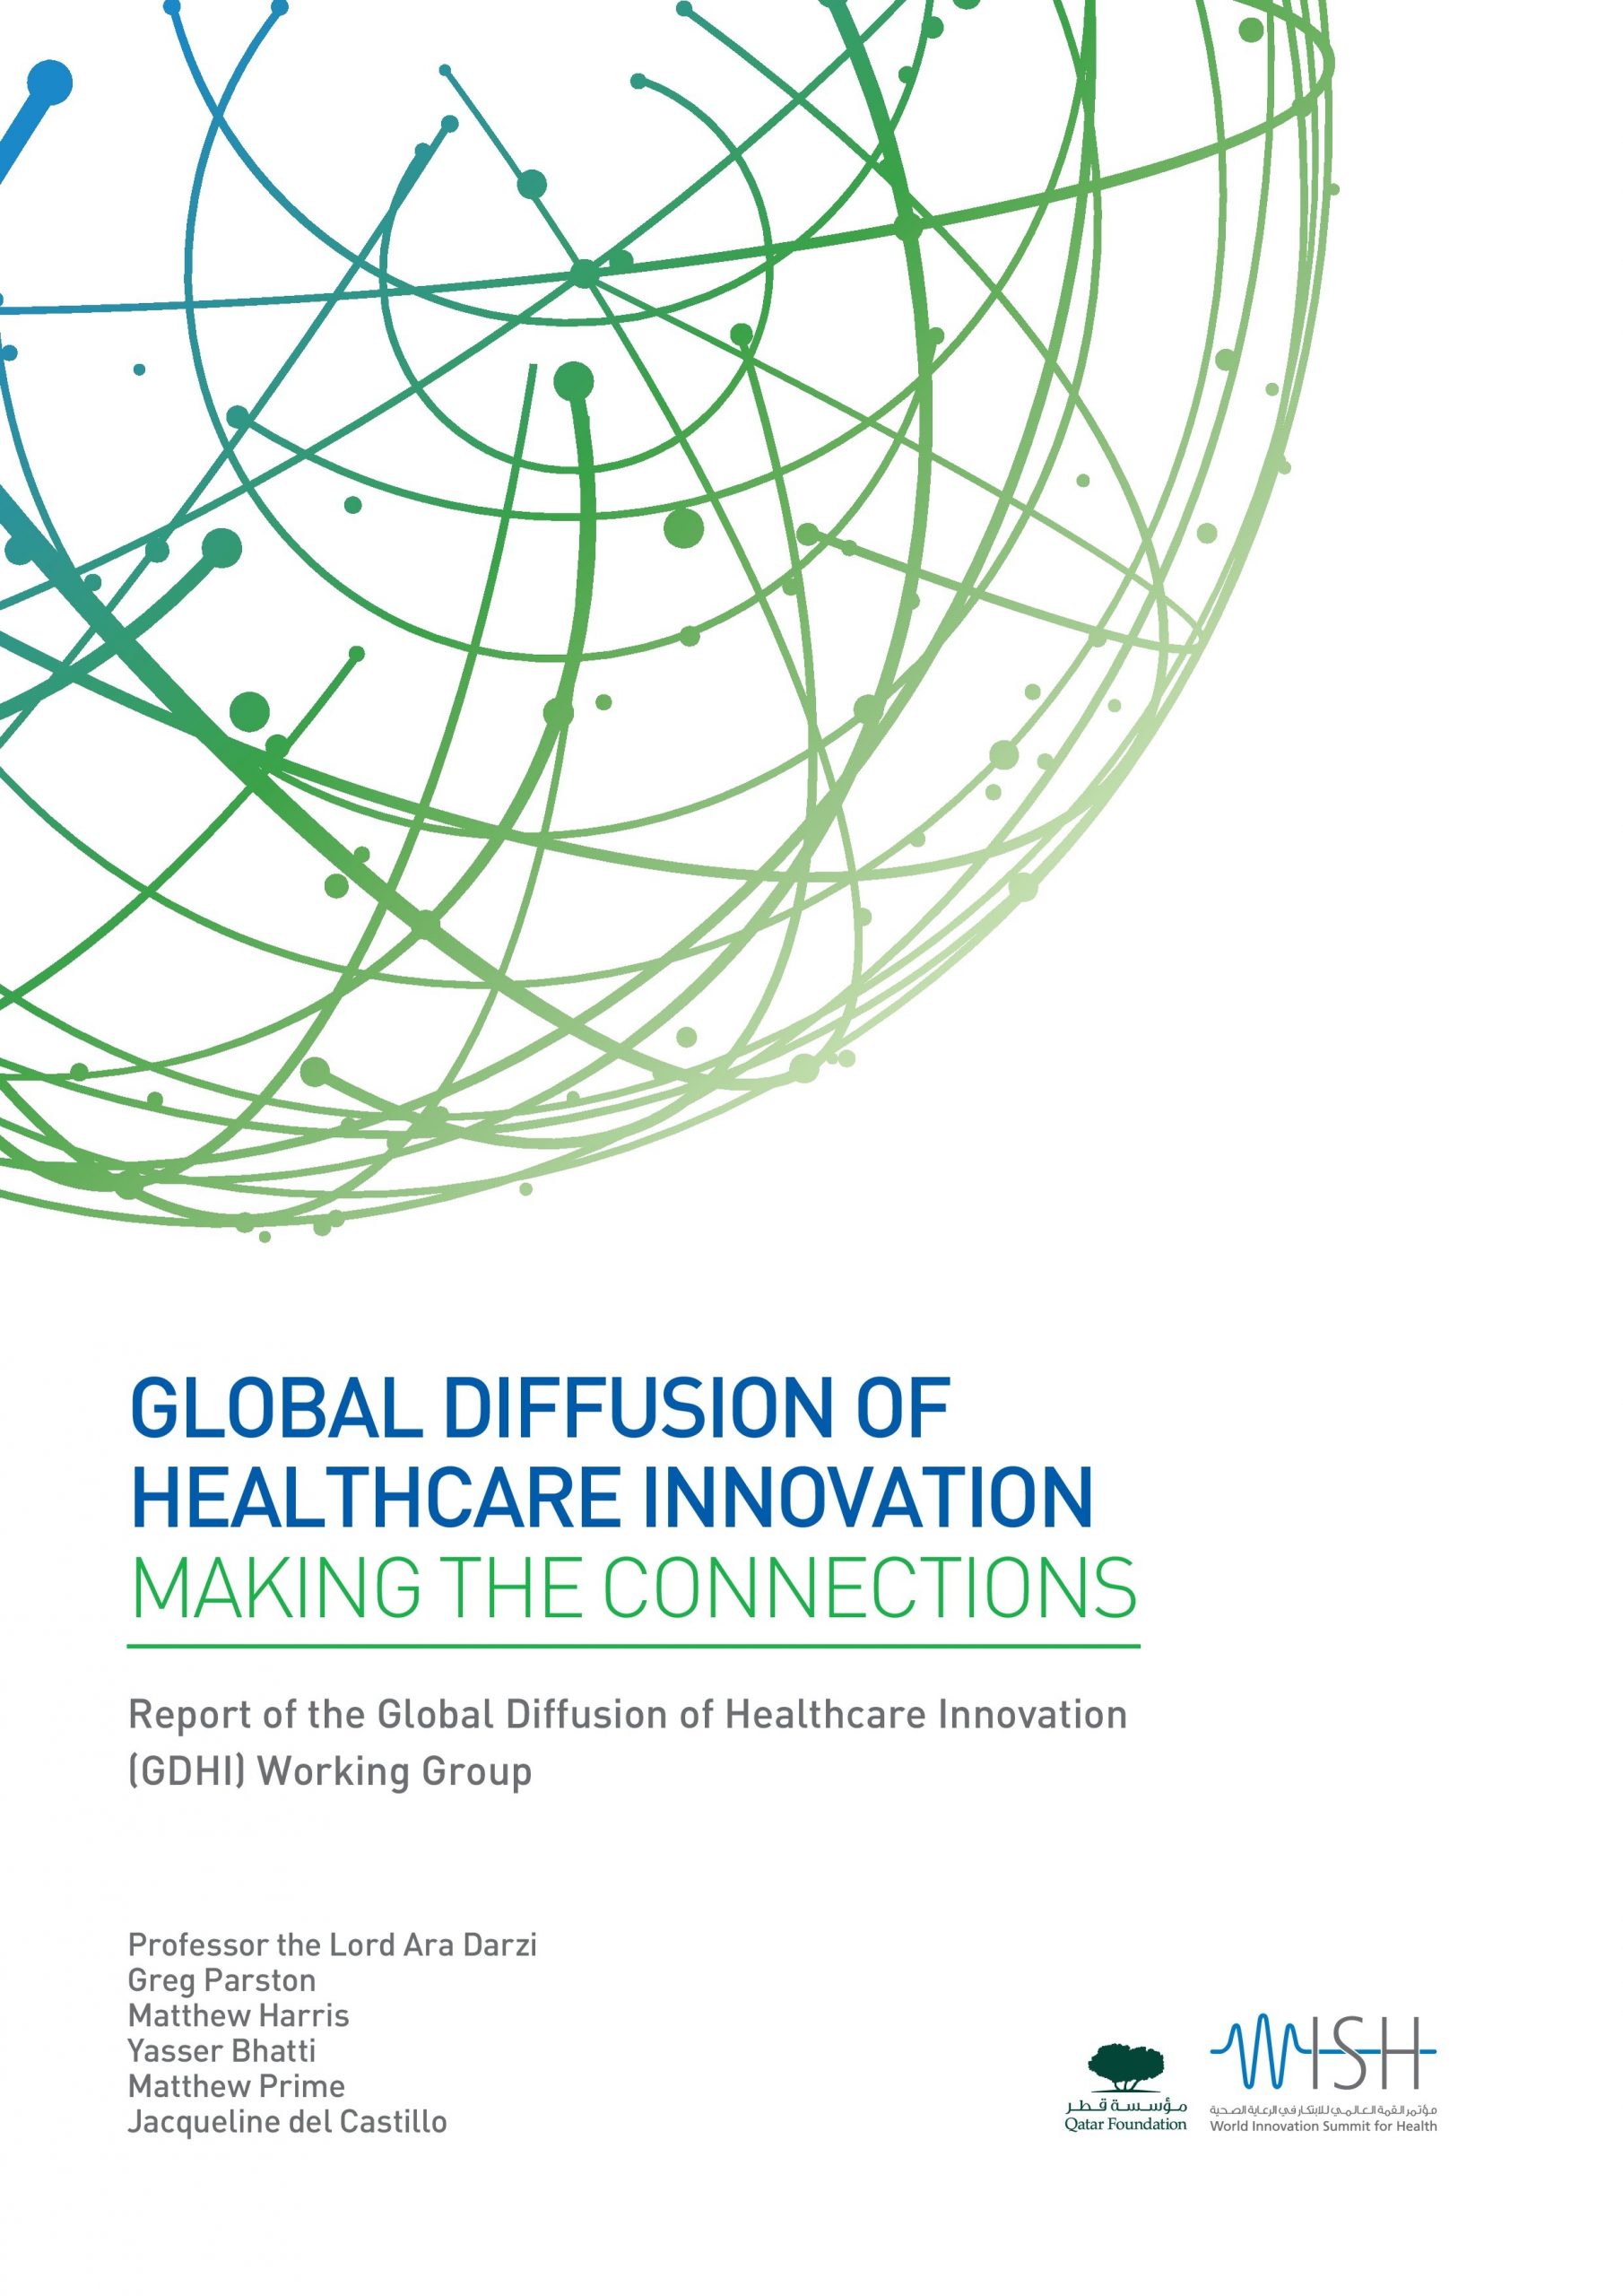 Global Diffusion of Healthcare Innovation: Making the Connections